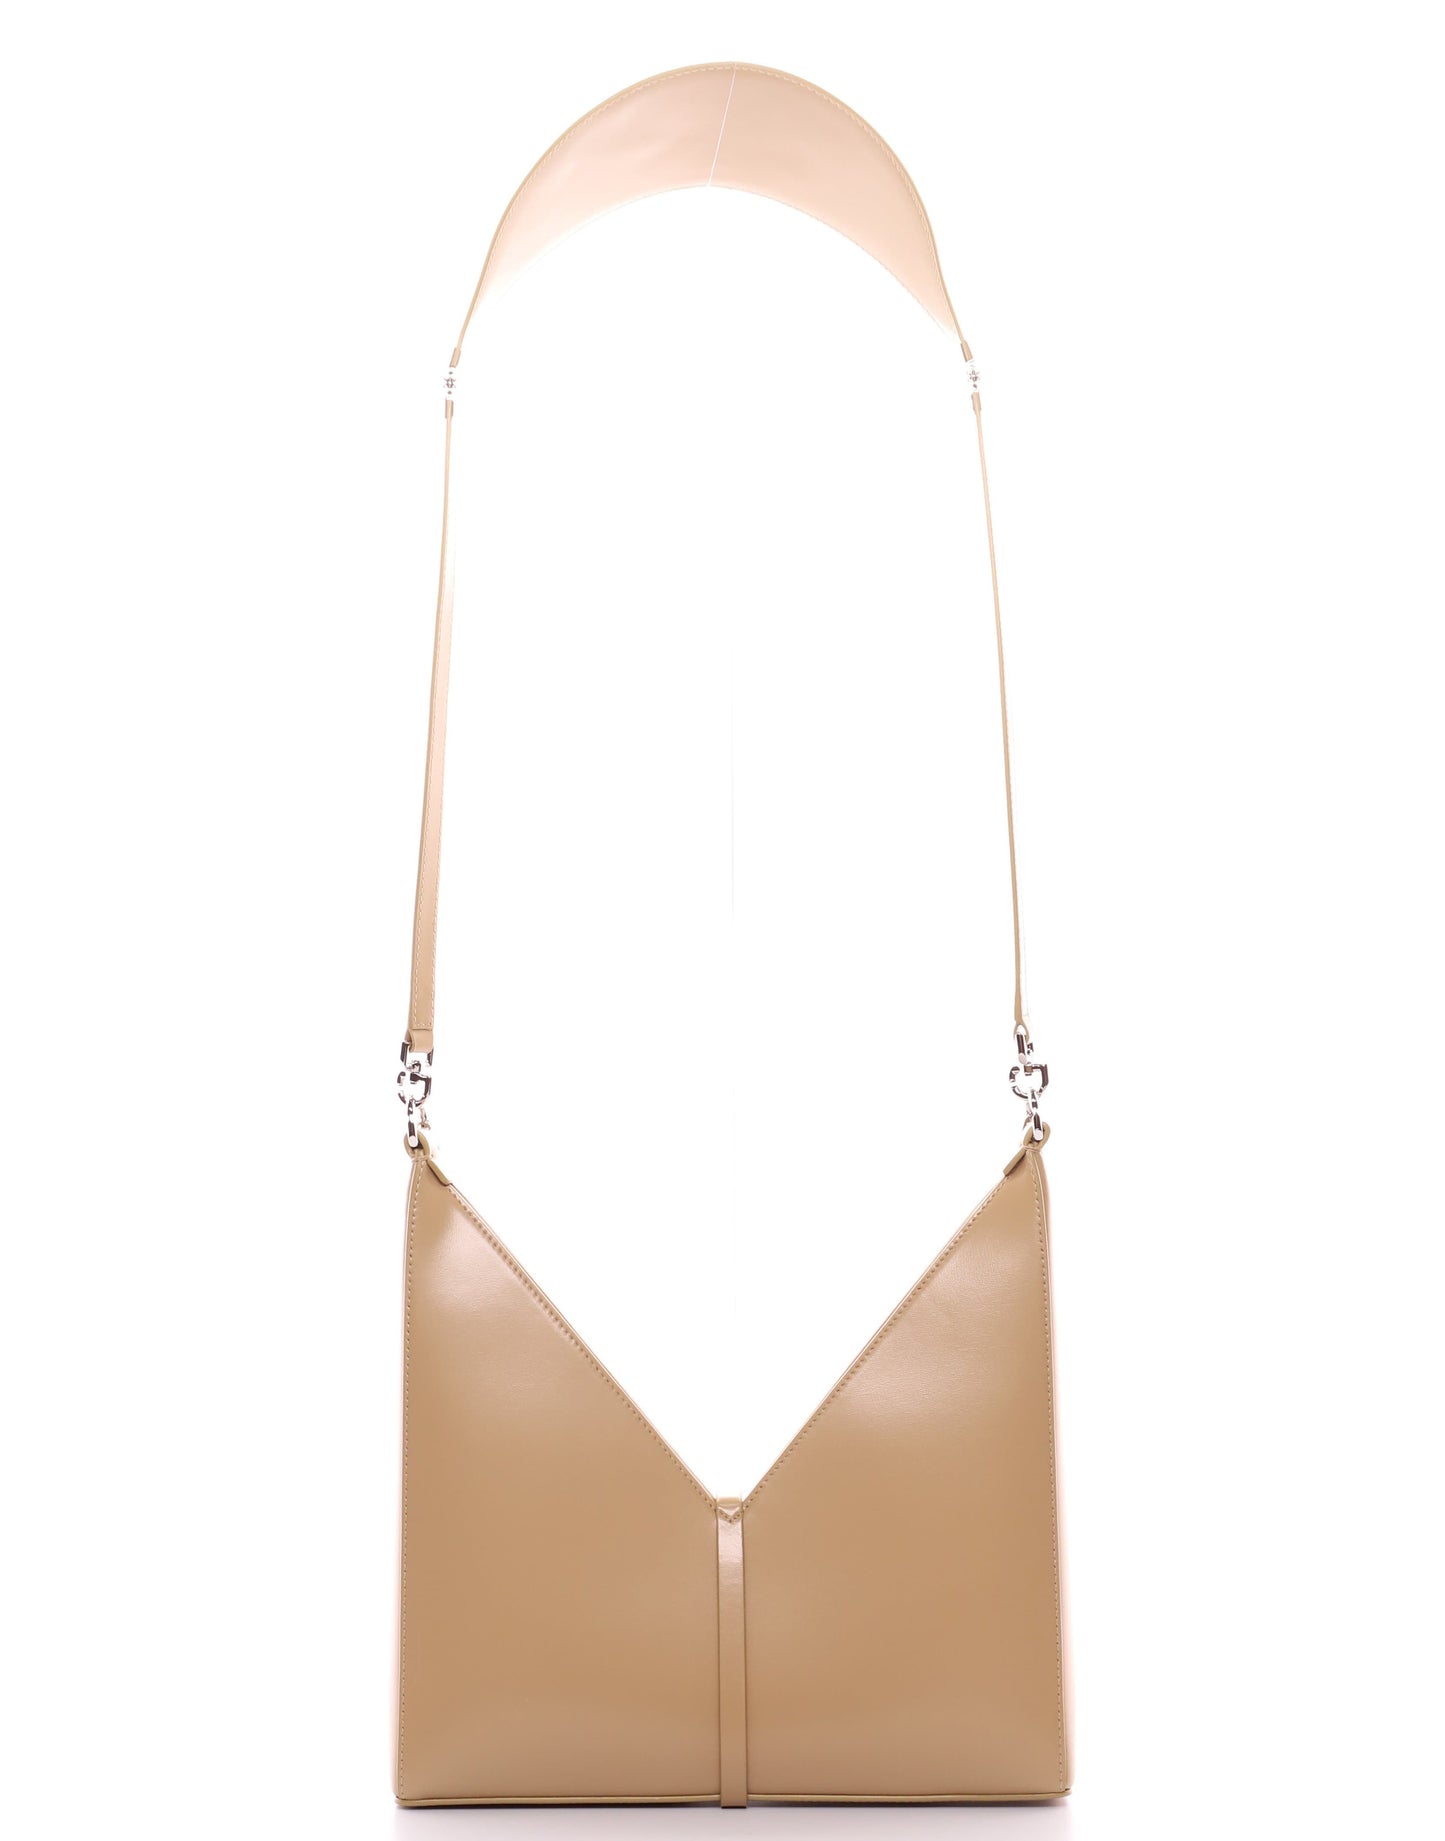 GIVENCHY-Beige Cappuccino Cut Out Small Bag-BEIGE